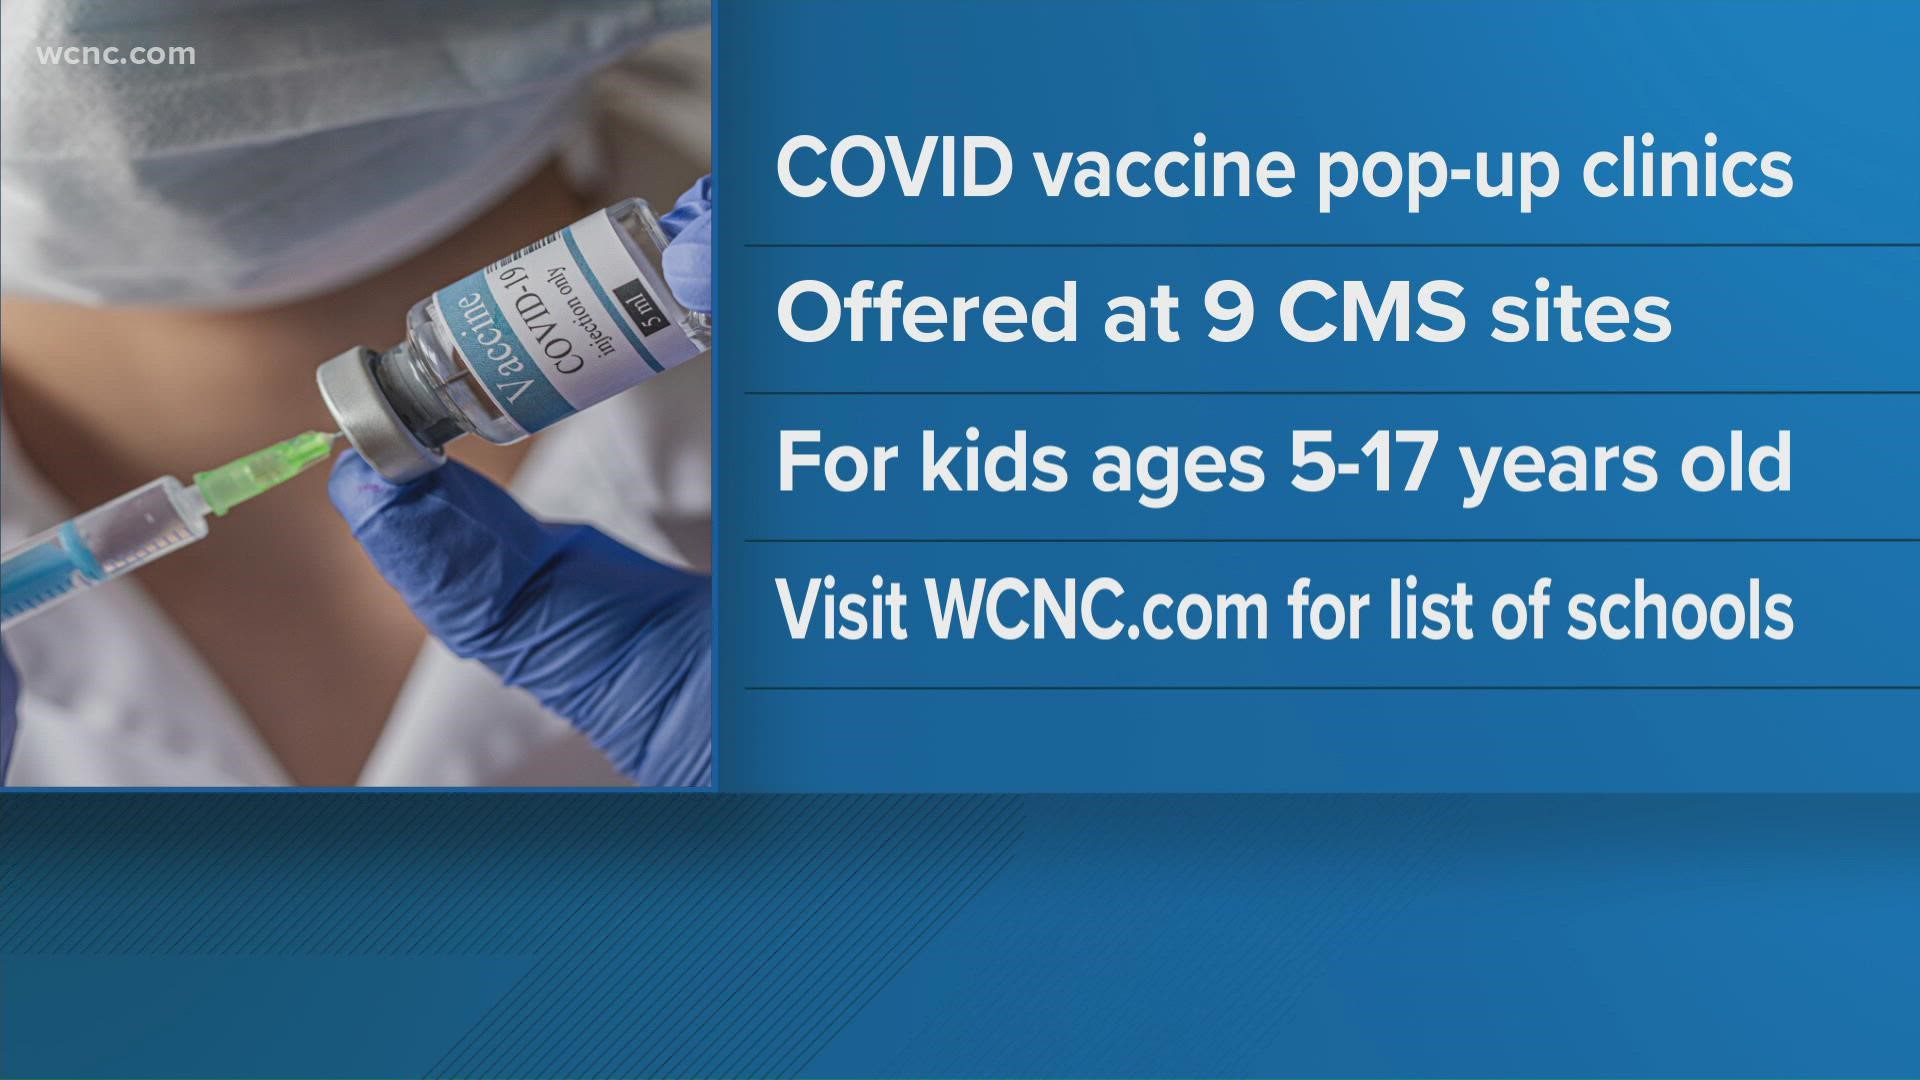 Charlotte-Mecklenburg Schools is partnering with the county health department to offer the vaccines.